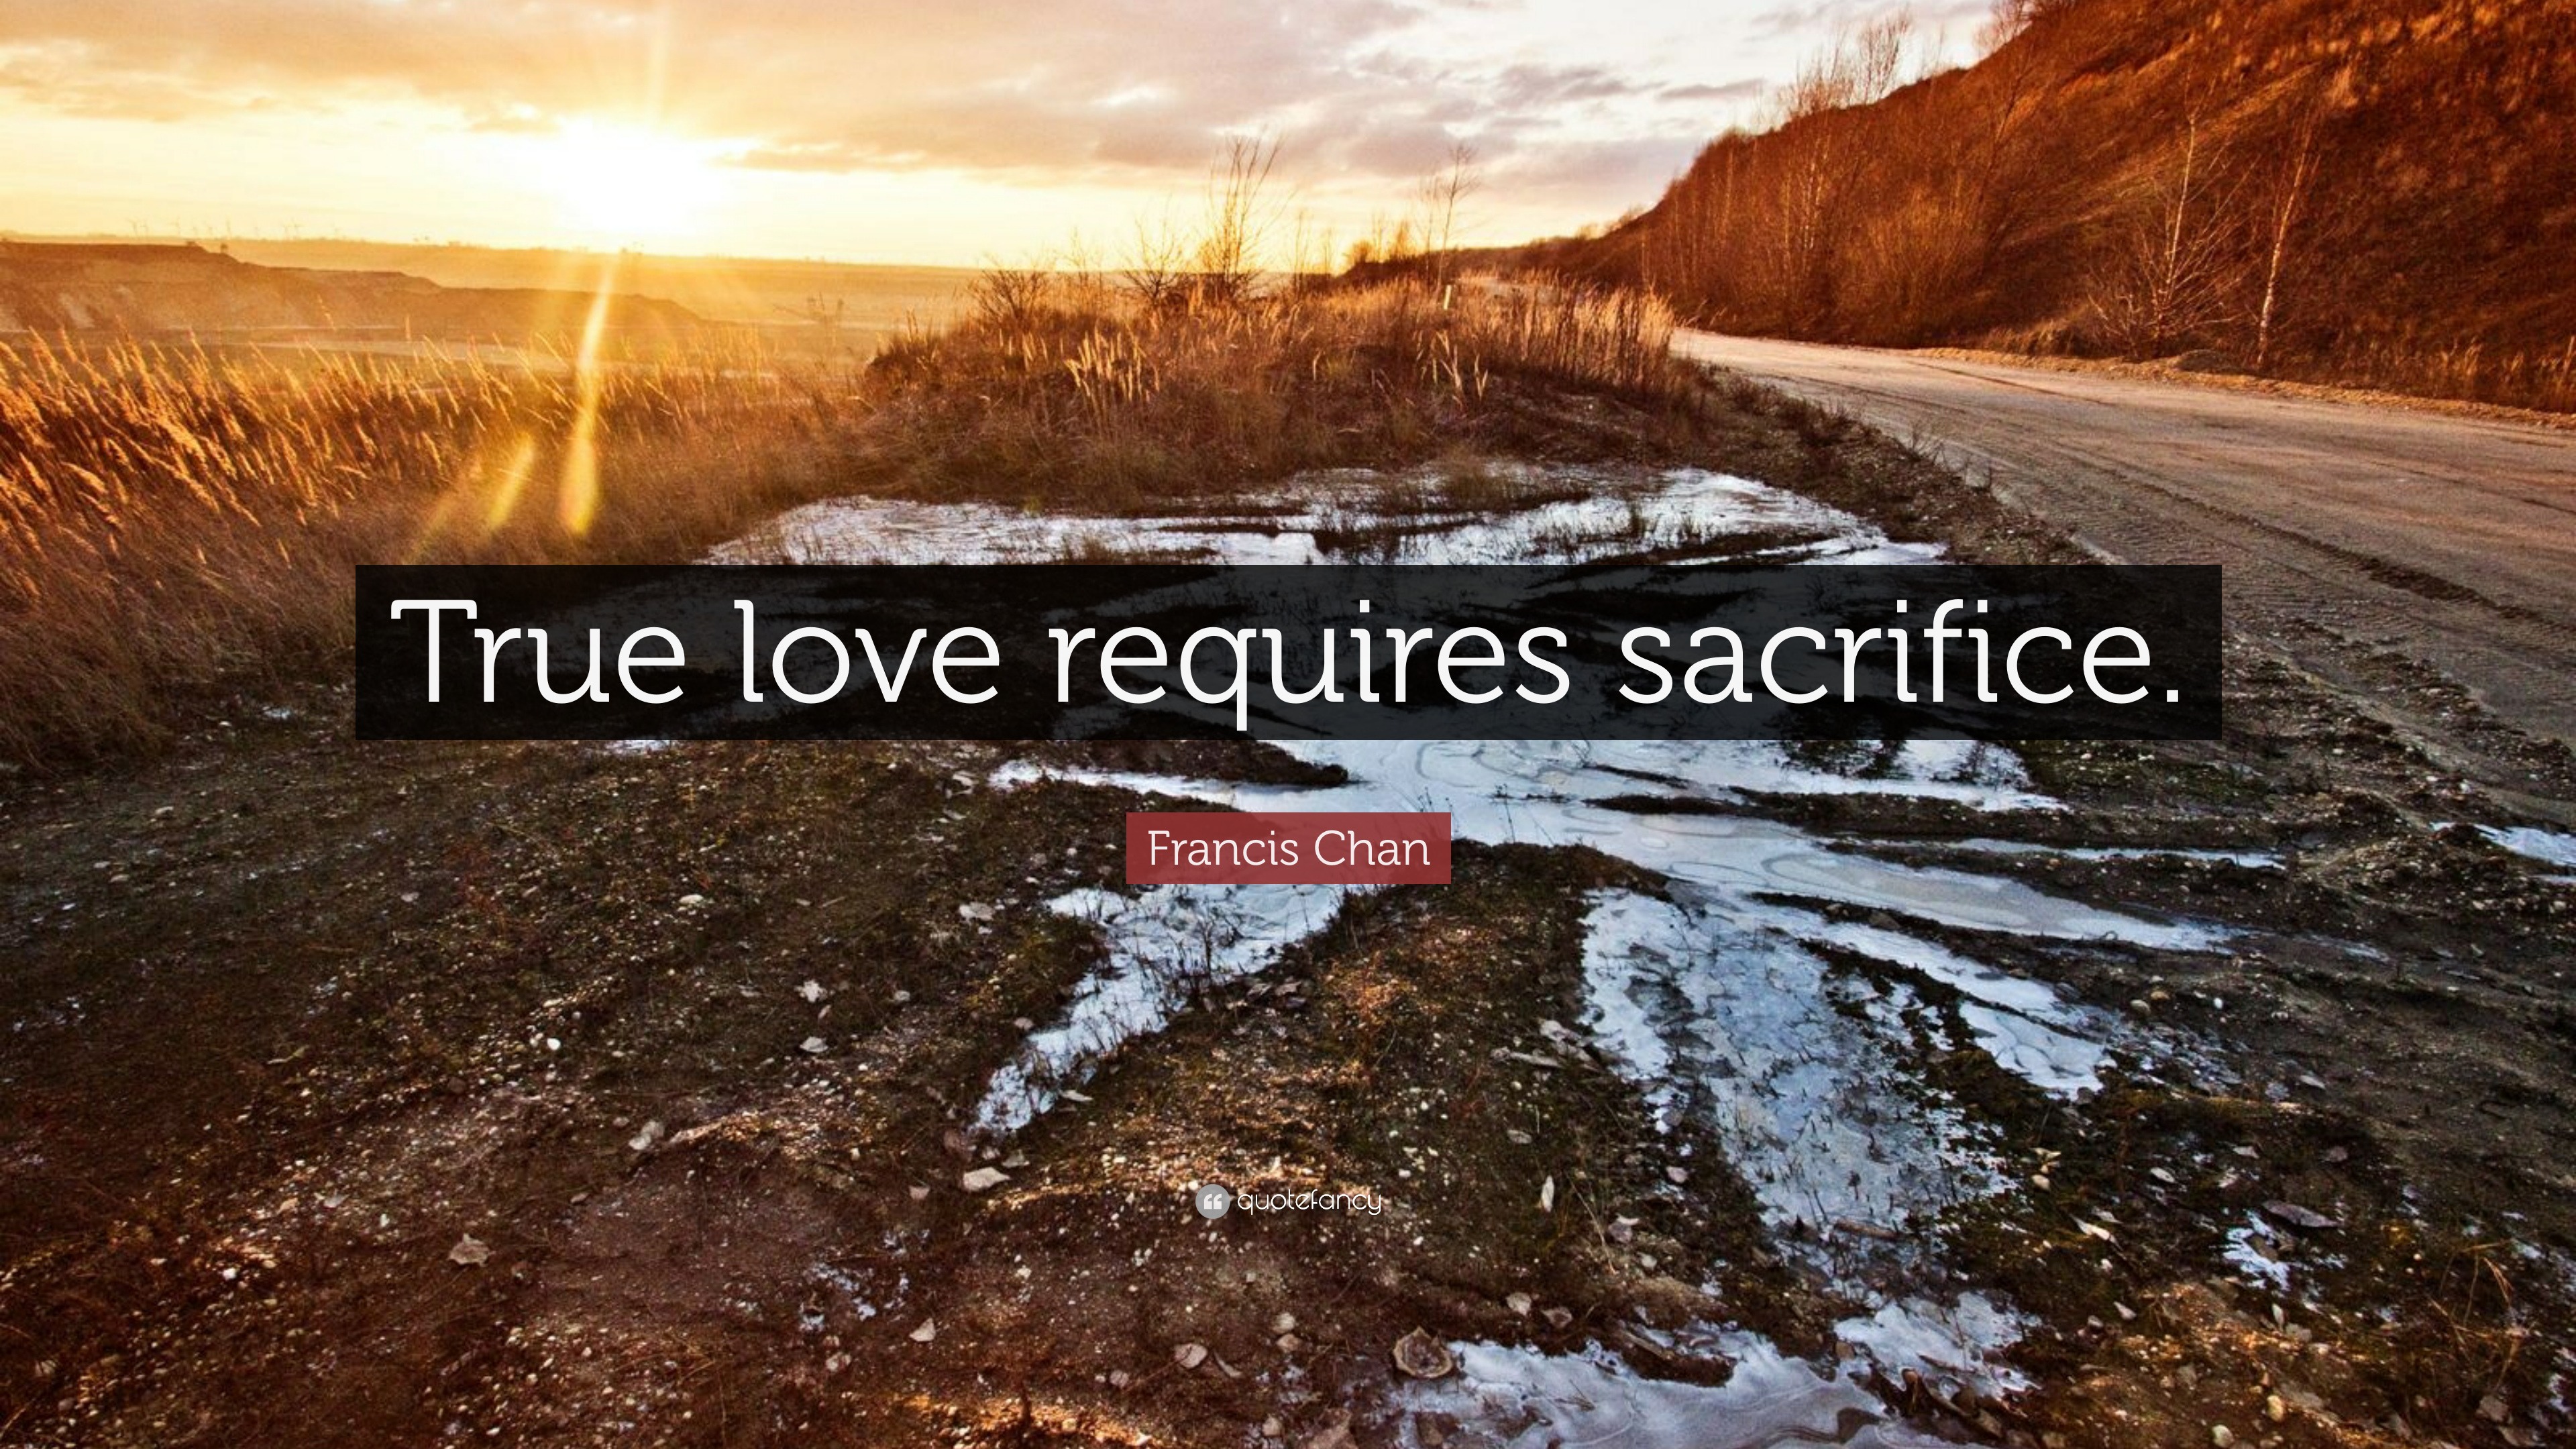 Francis Chan Quote “True love requires sacrifice ”